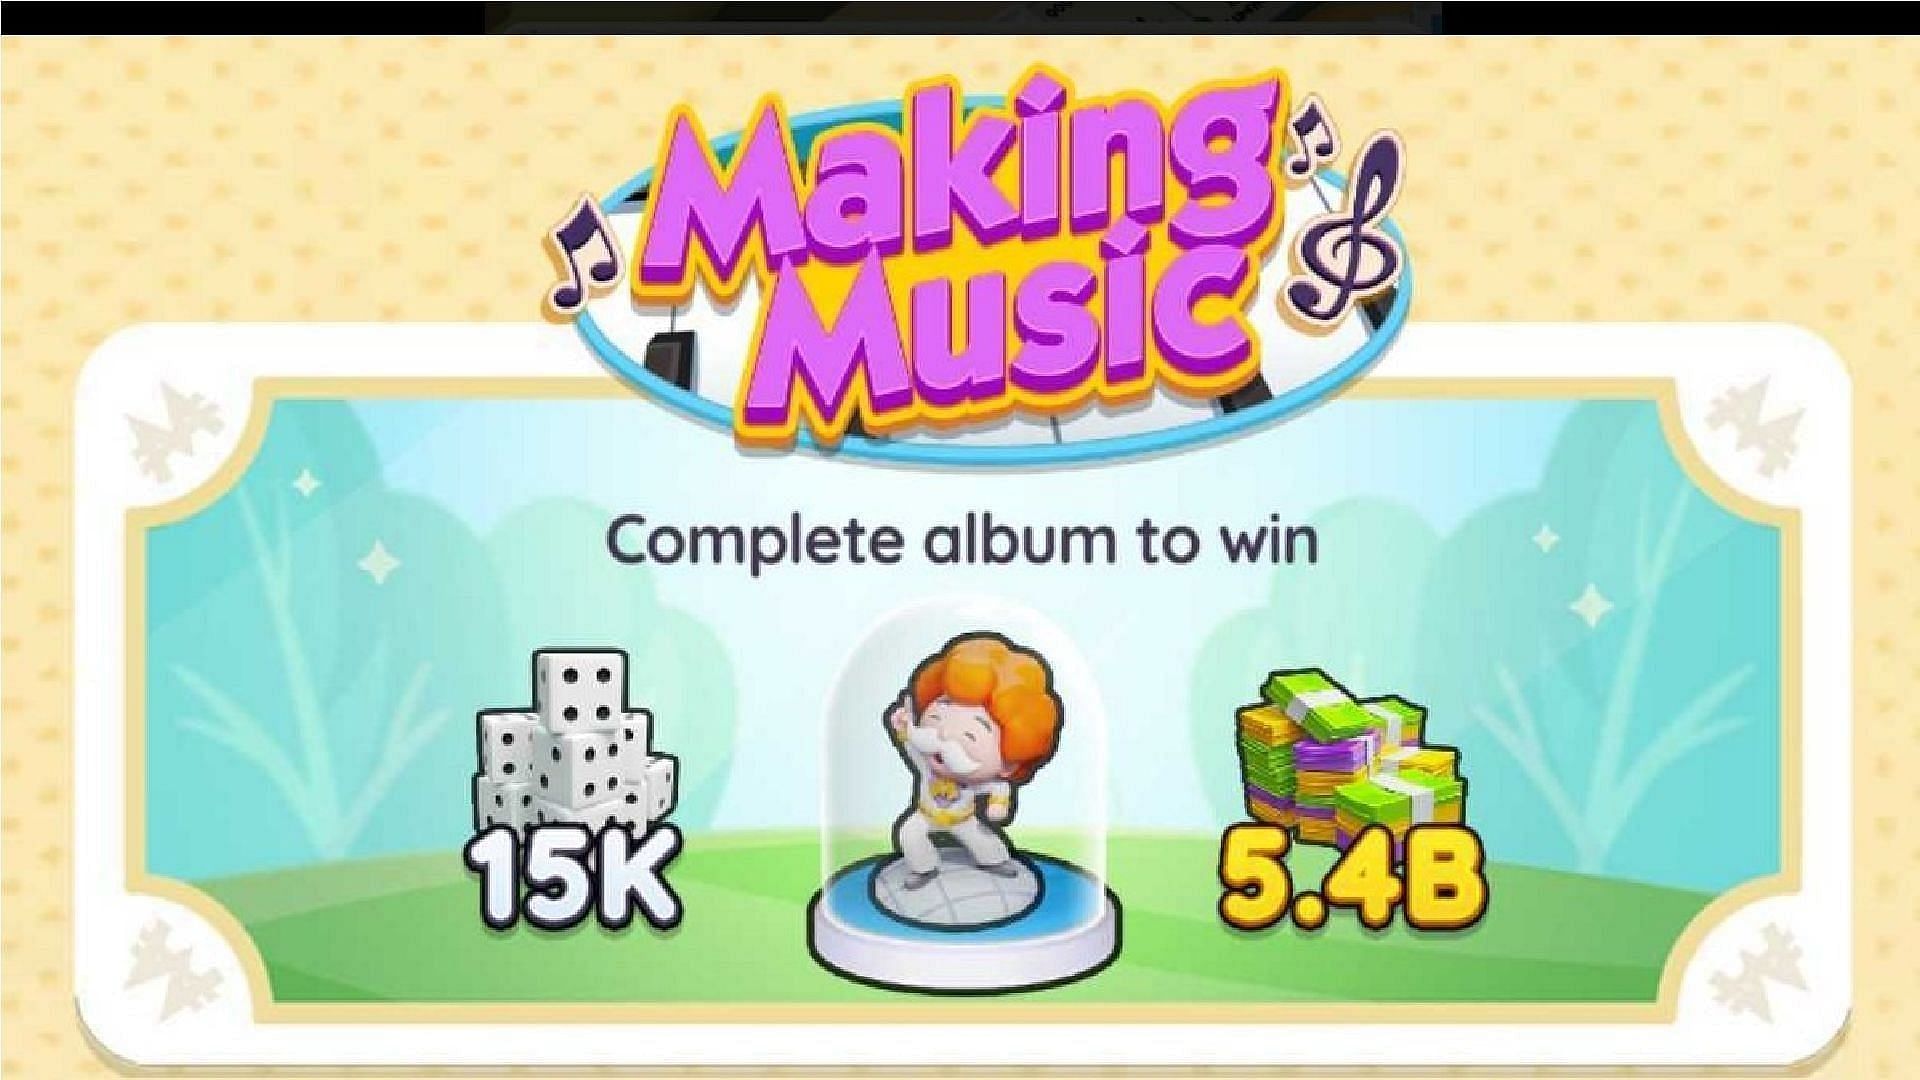 The Making Music season is ending in a few days (Image via Scopely)